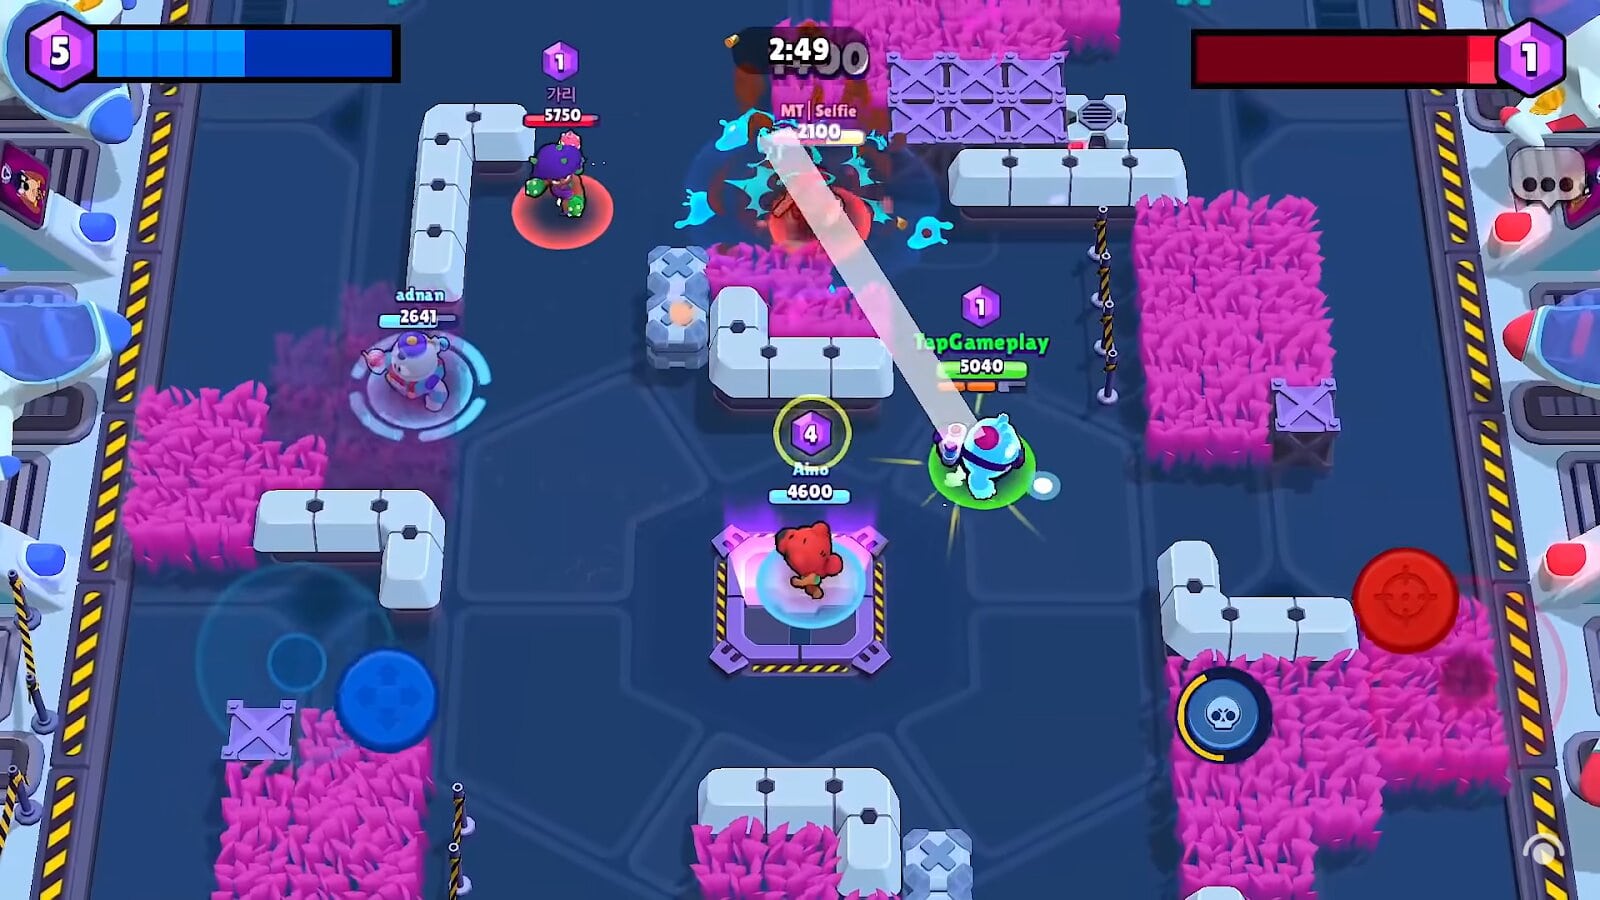 Brawl Stars - A Guide on How to Play The New Brawler Squeak